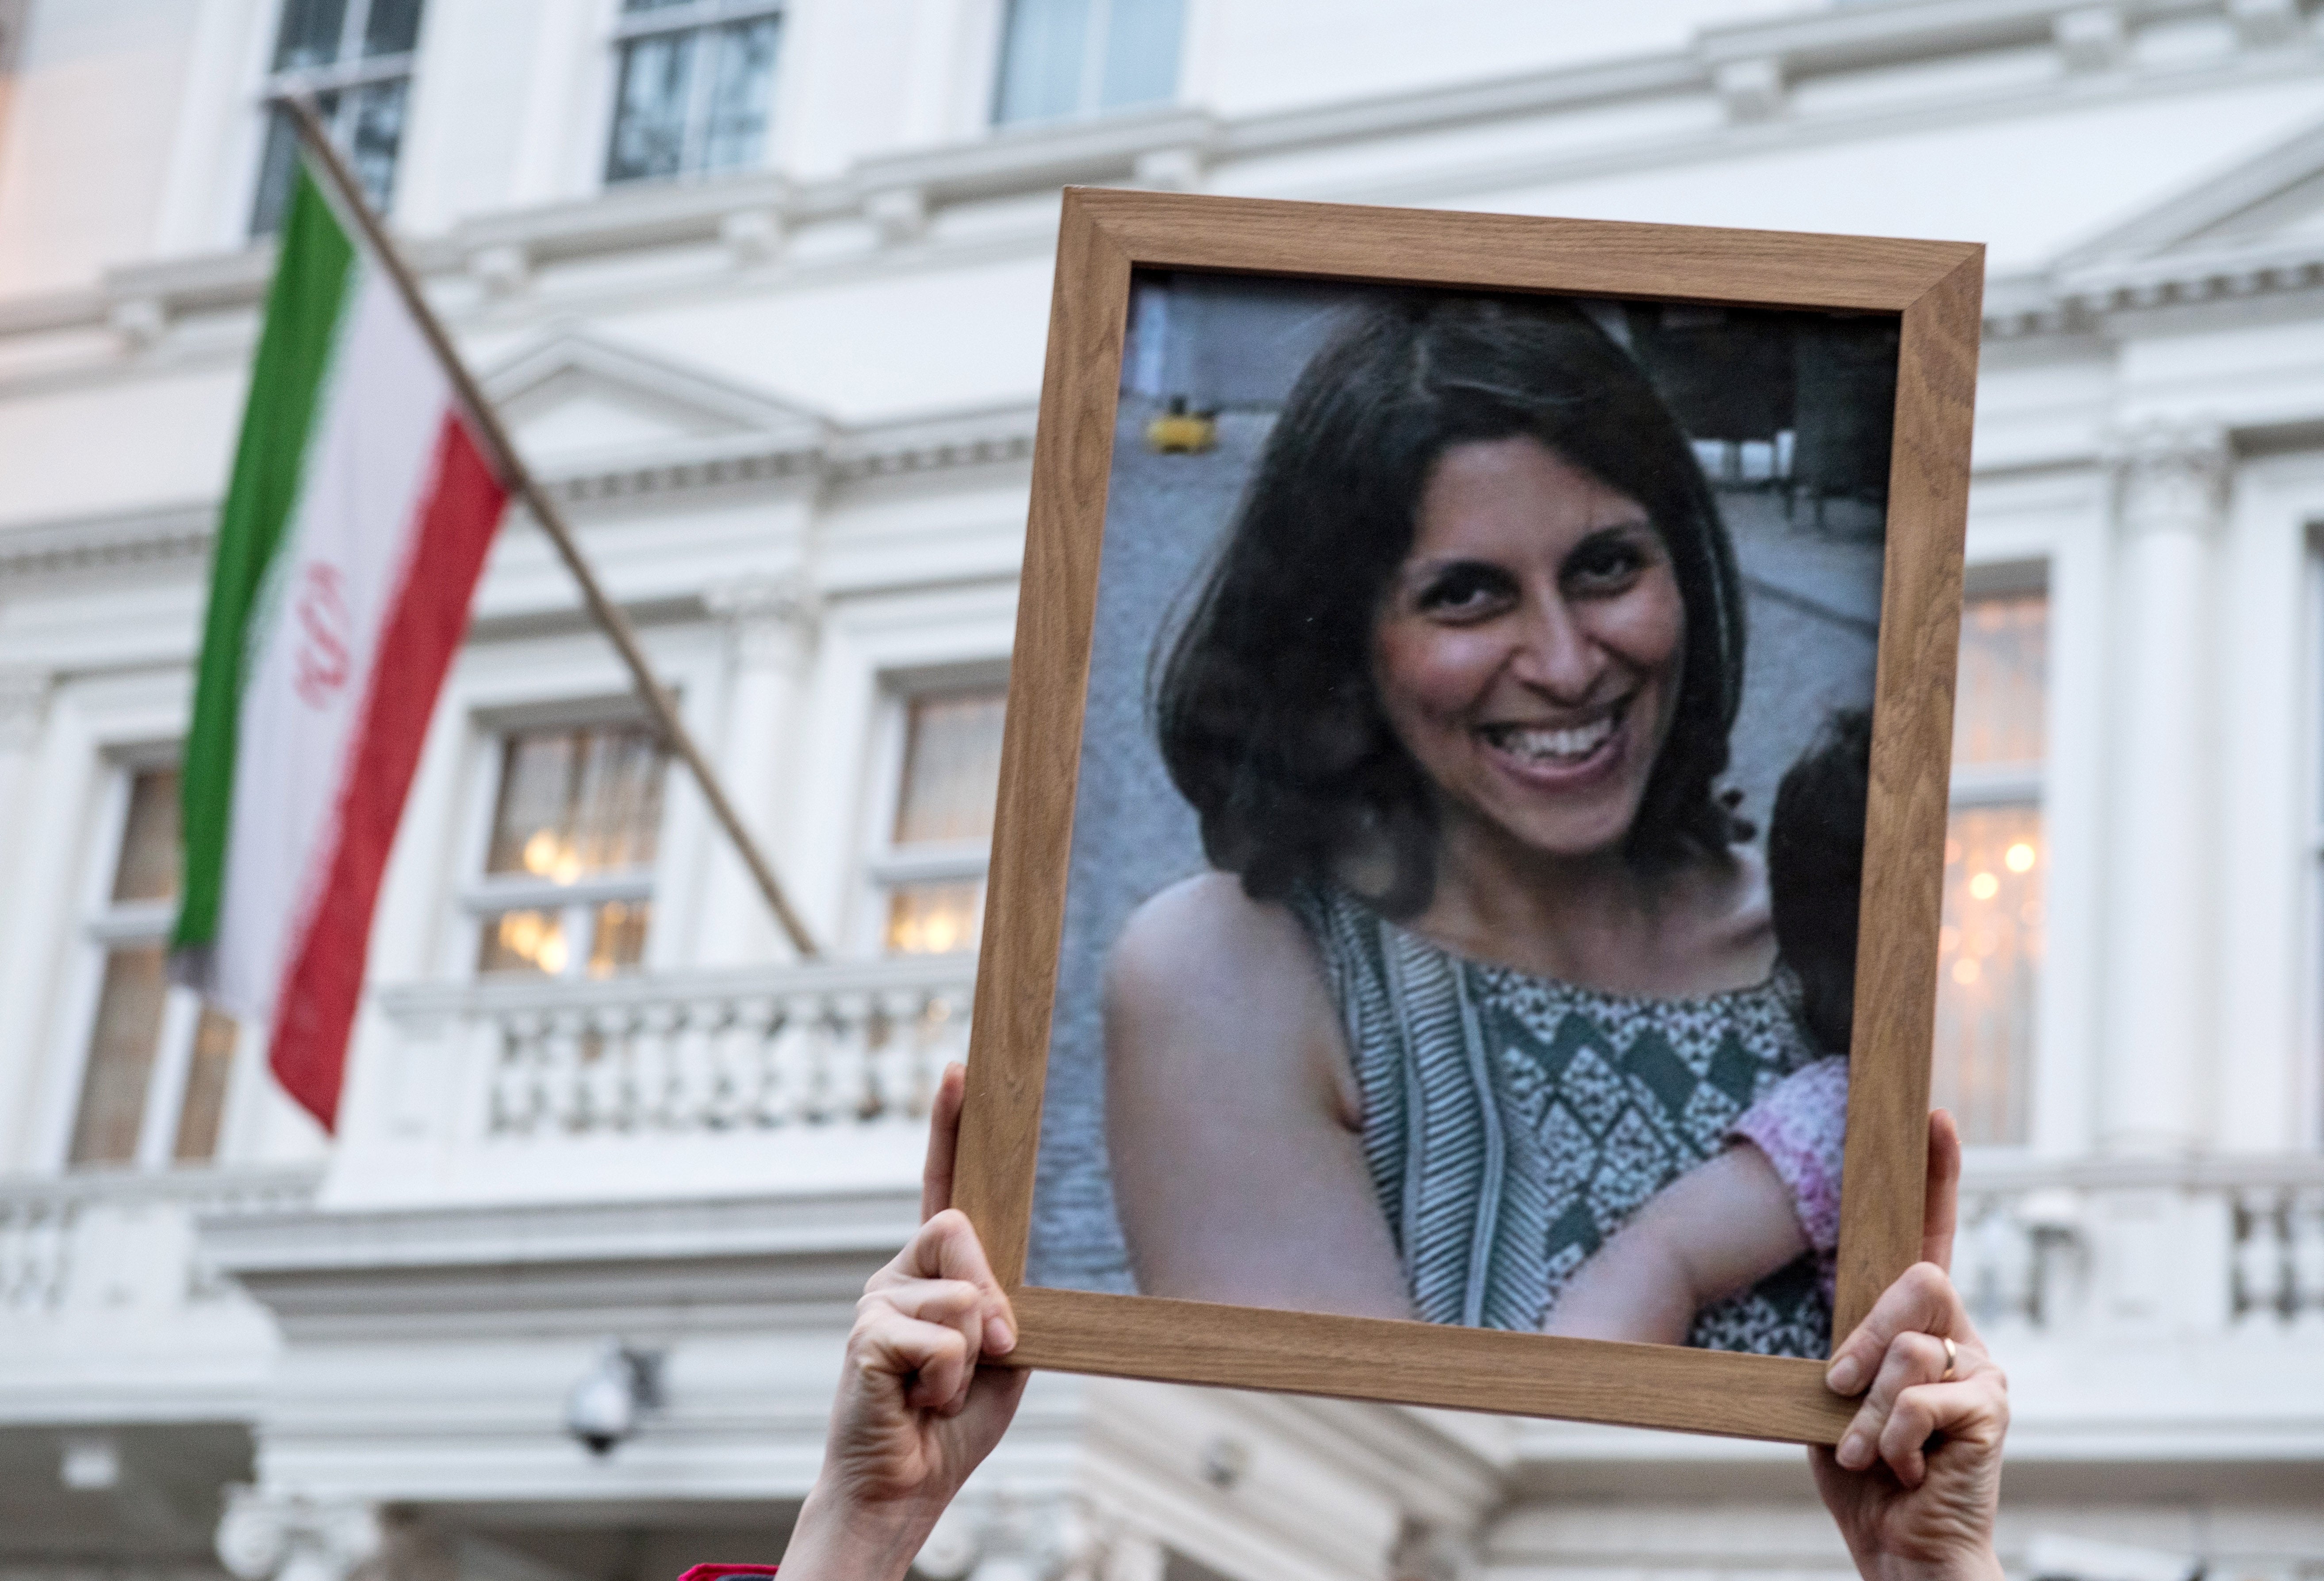 Supporters hold a photo of Nazanin Zaghari-Ratcliffe during a vigil for British-Iranian mother, Nazanin Zaghari-Ratcliffe, imprisoned in Tehran outisde the Iranian Embassy on 16 January, 2017 in London, England. She has been detained in Iran since 2016.